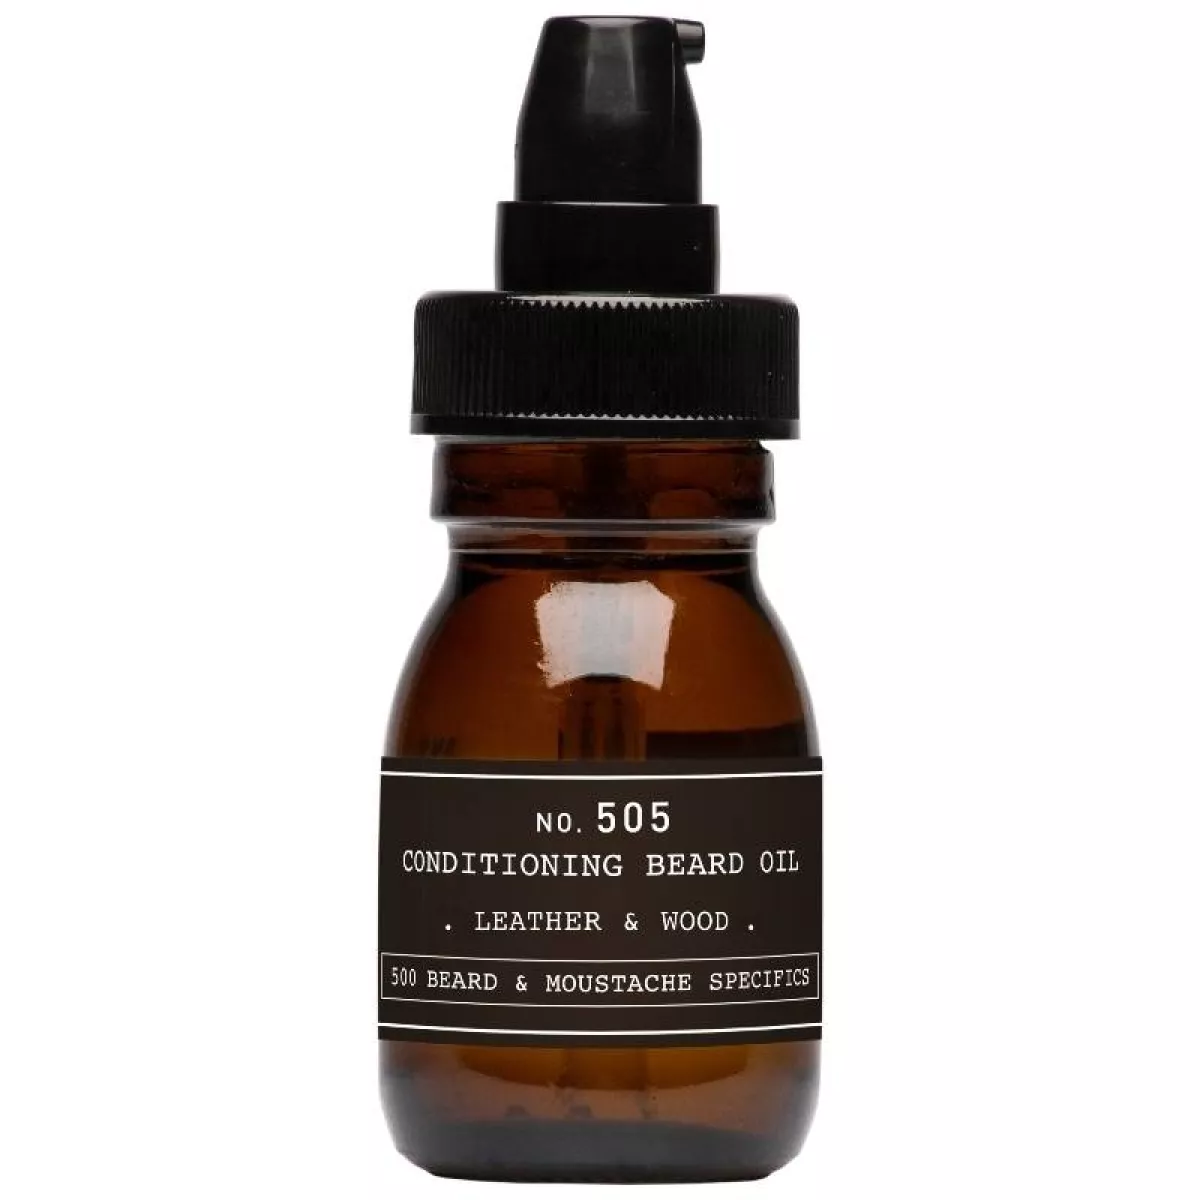 #1 - Depot No. 505 Conditioning Beard Oil 30 ml - Leather & Wood